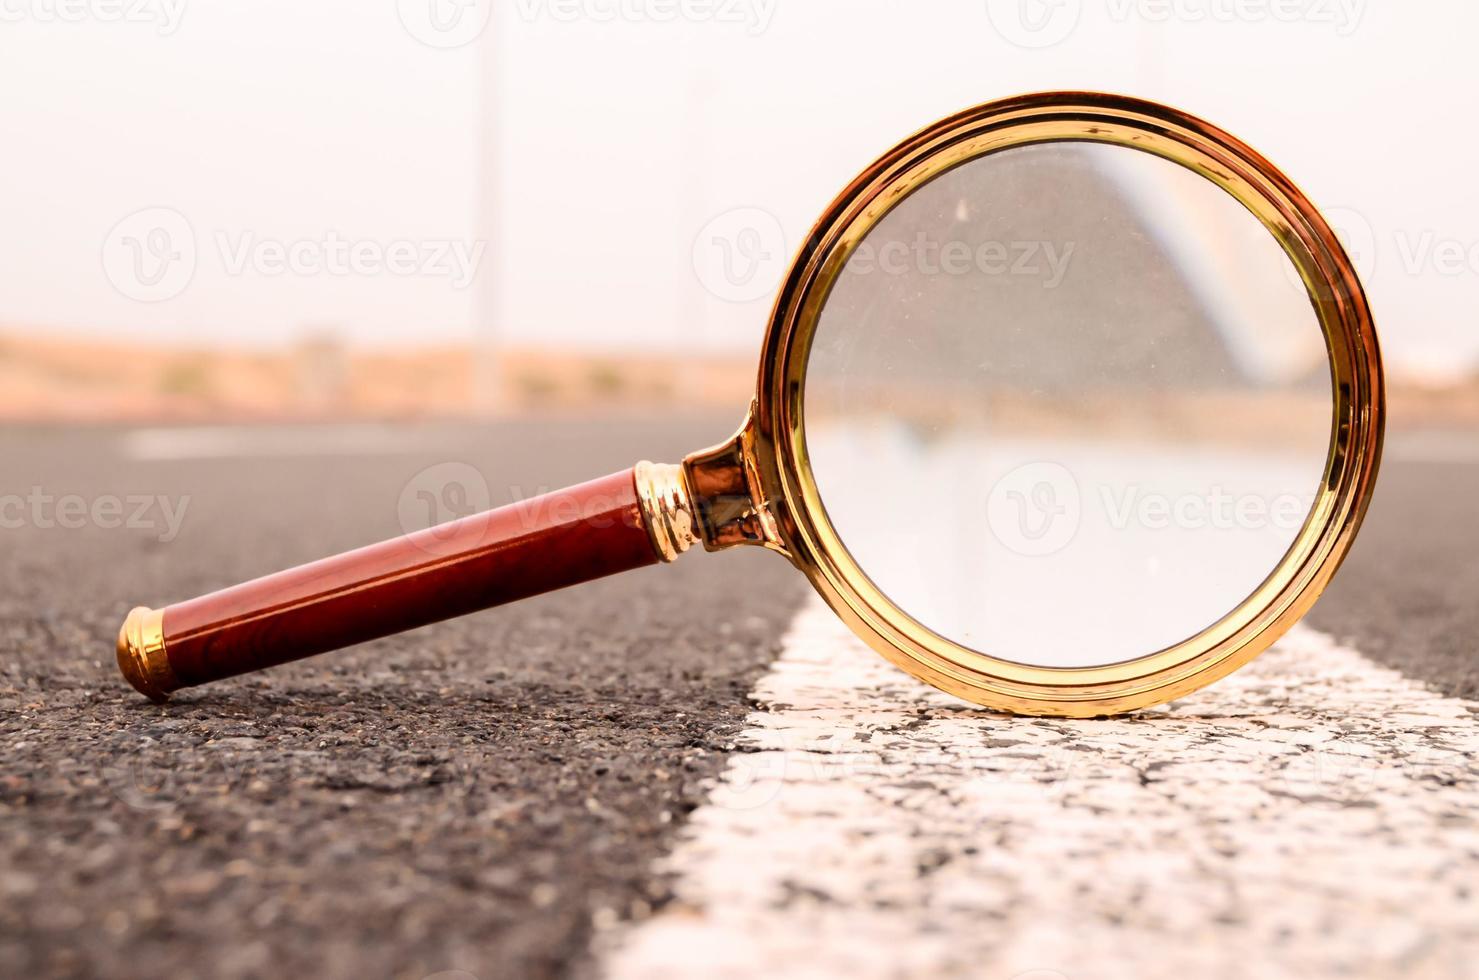 Magnifying glass close up photo